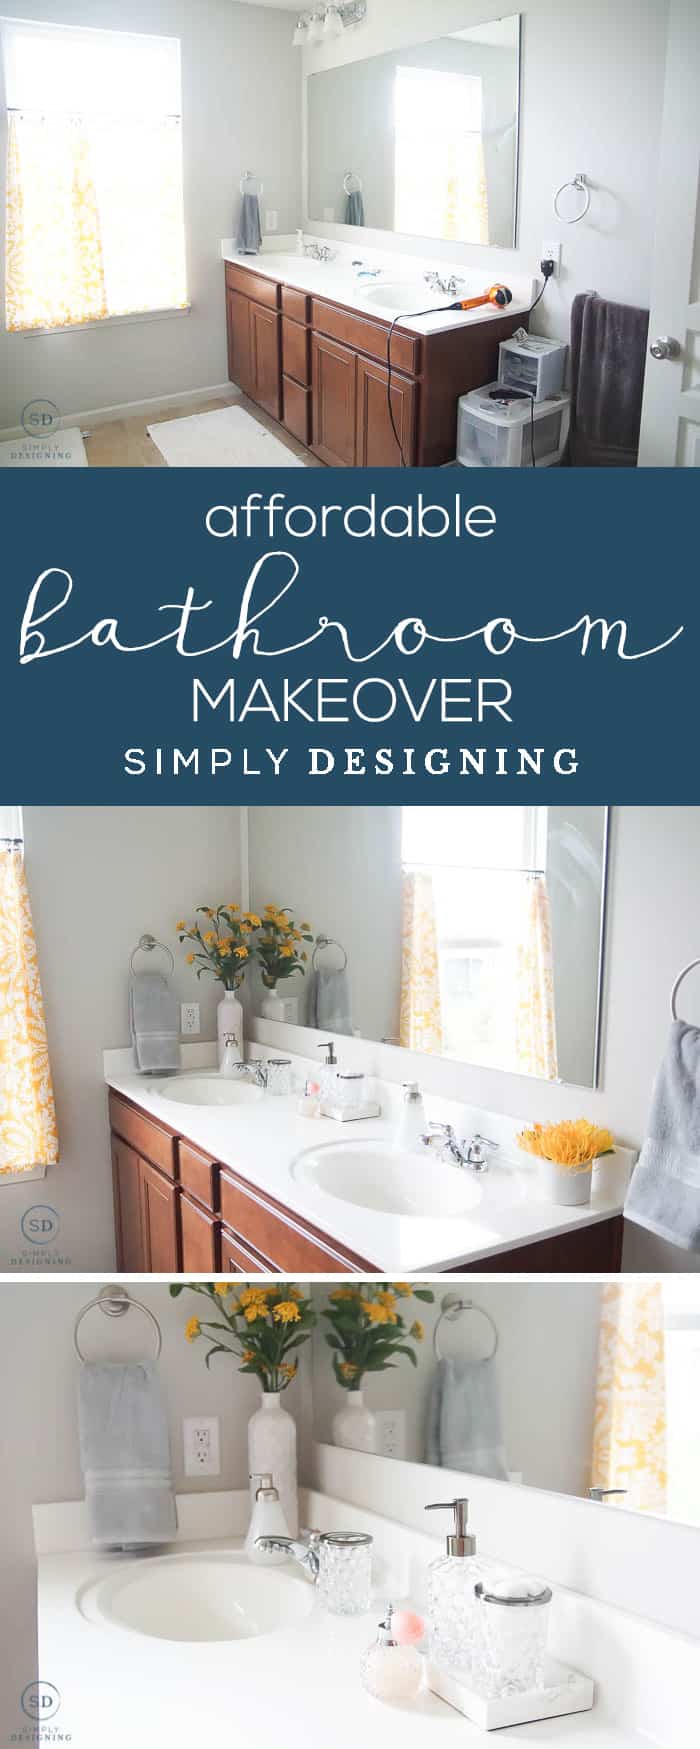 Affordable Master Bathroom Makeover - this budget-friendly bathroom makeover is so easy to do and looks amazing